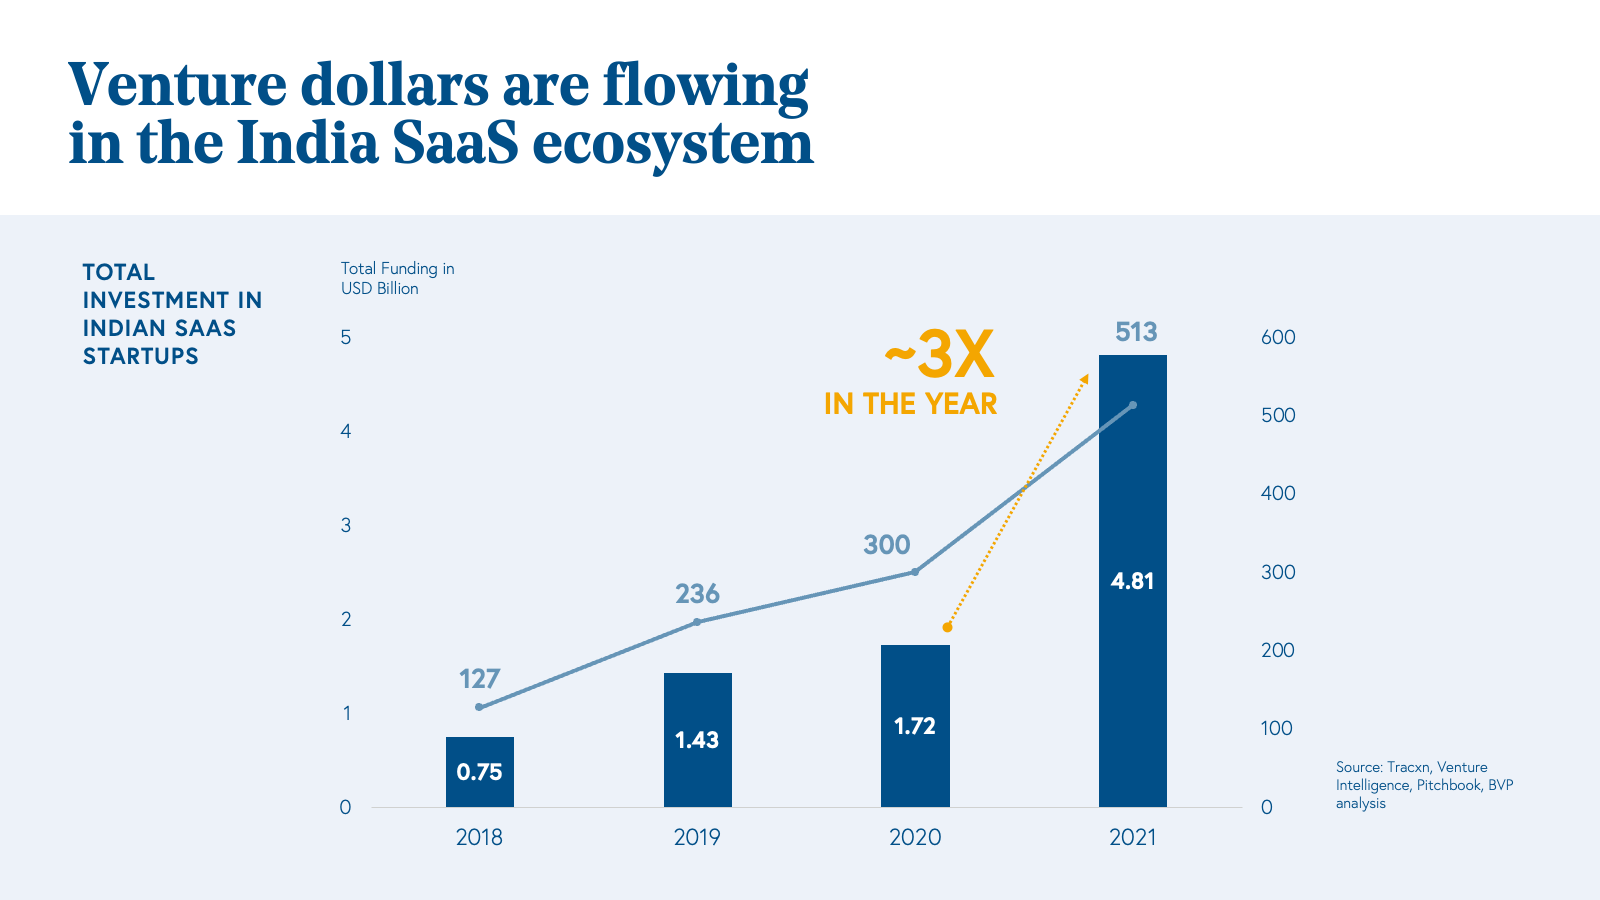 Venture dollars are flowing in the India SaaS ecosystem